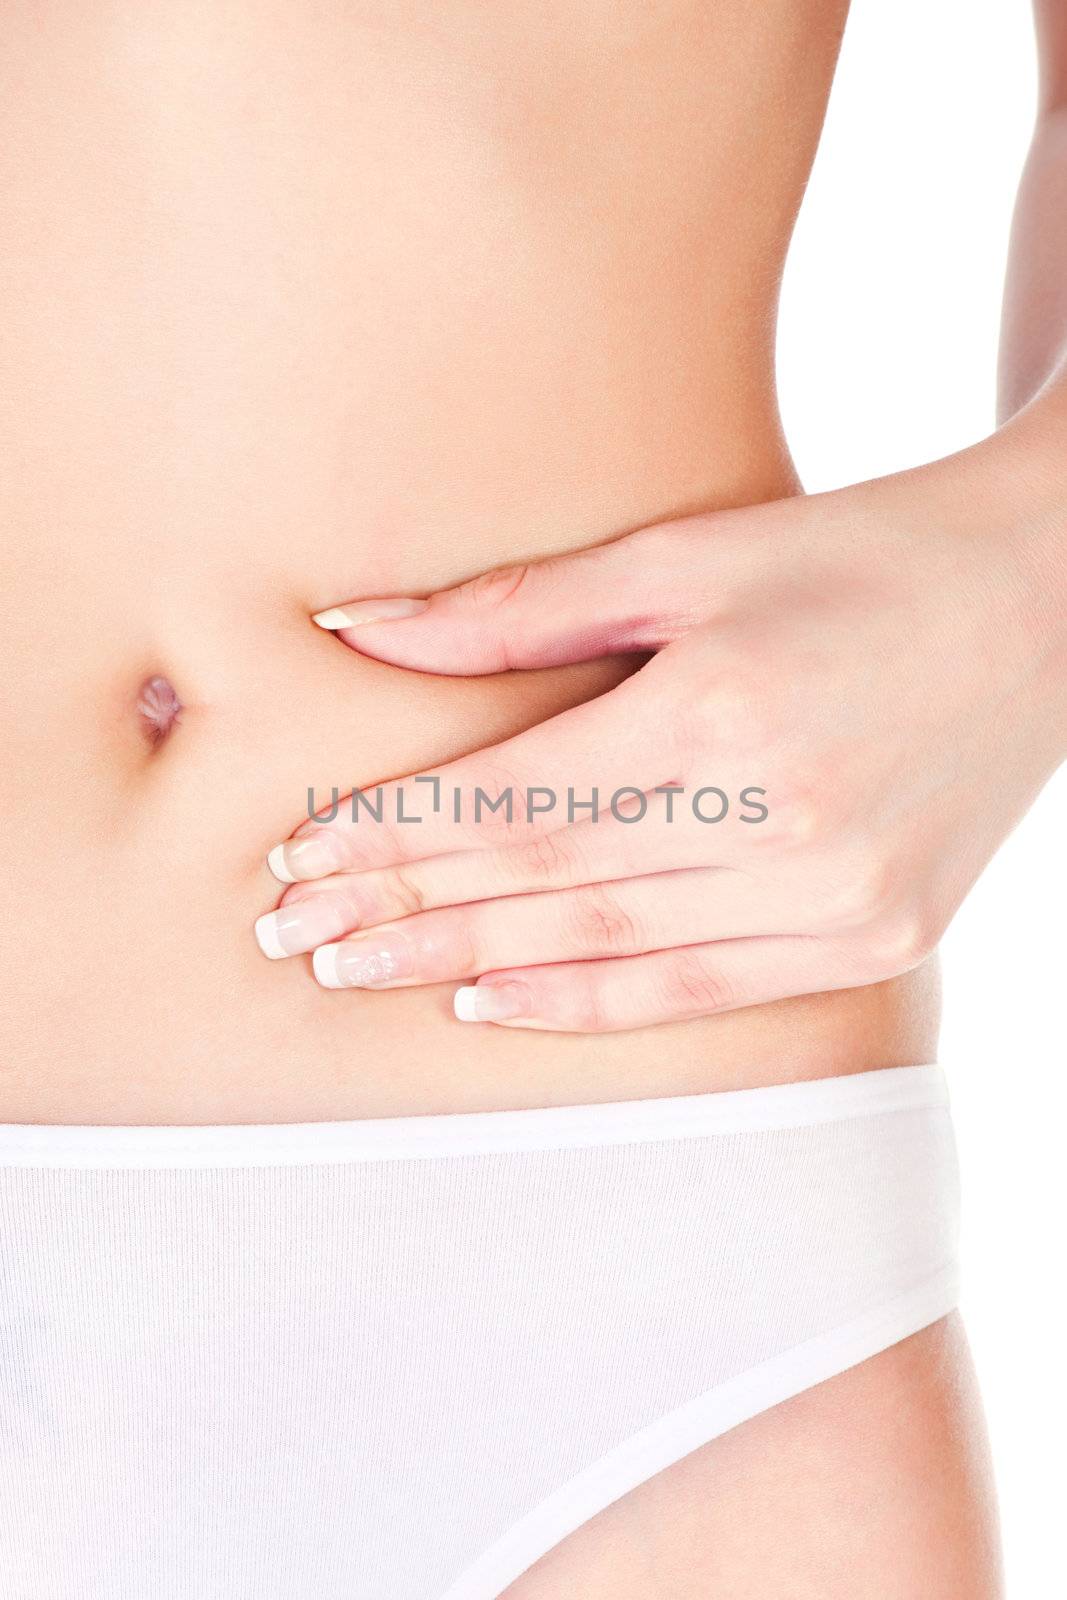 Woman pinching stomach for skin fold test, isolated on white. Health concept 